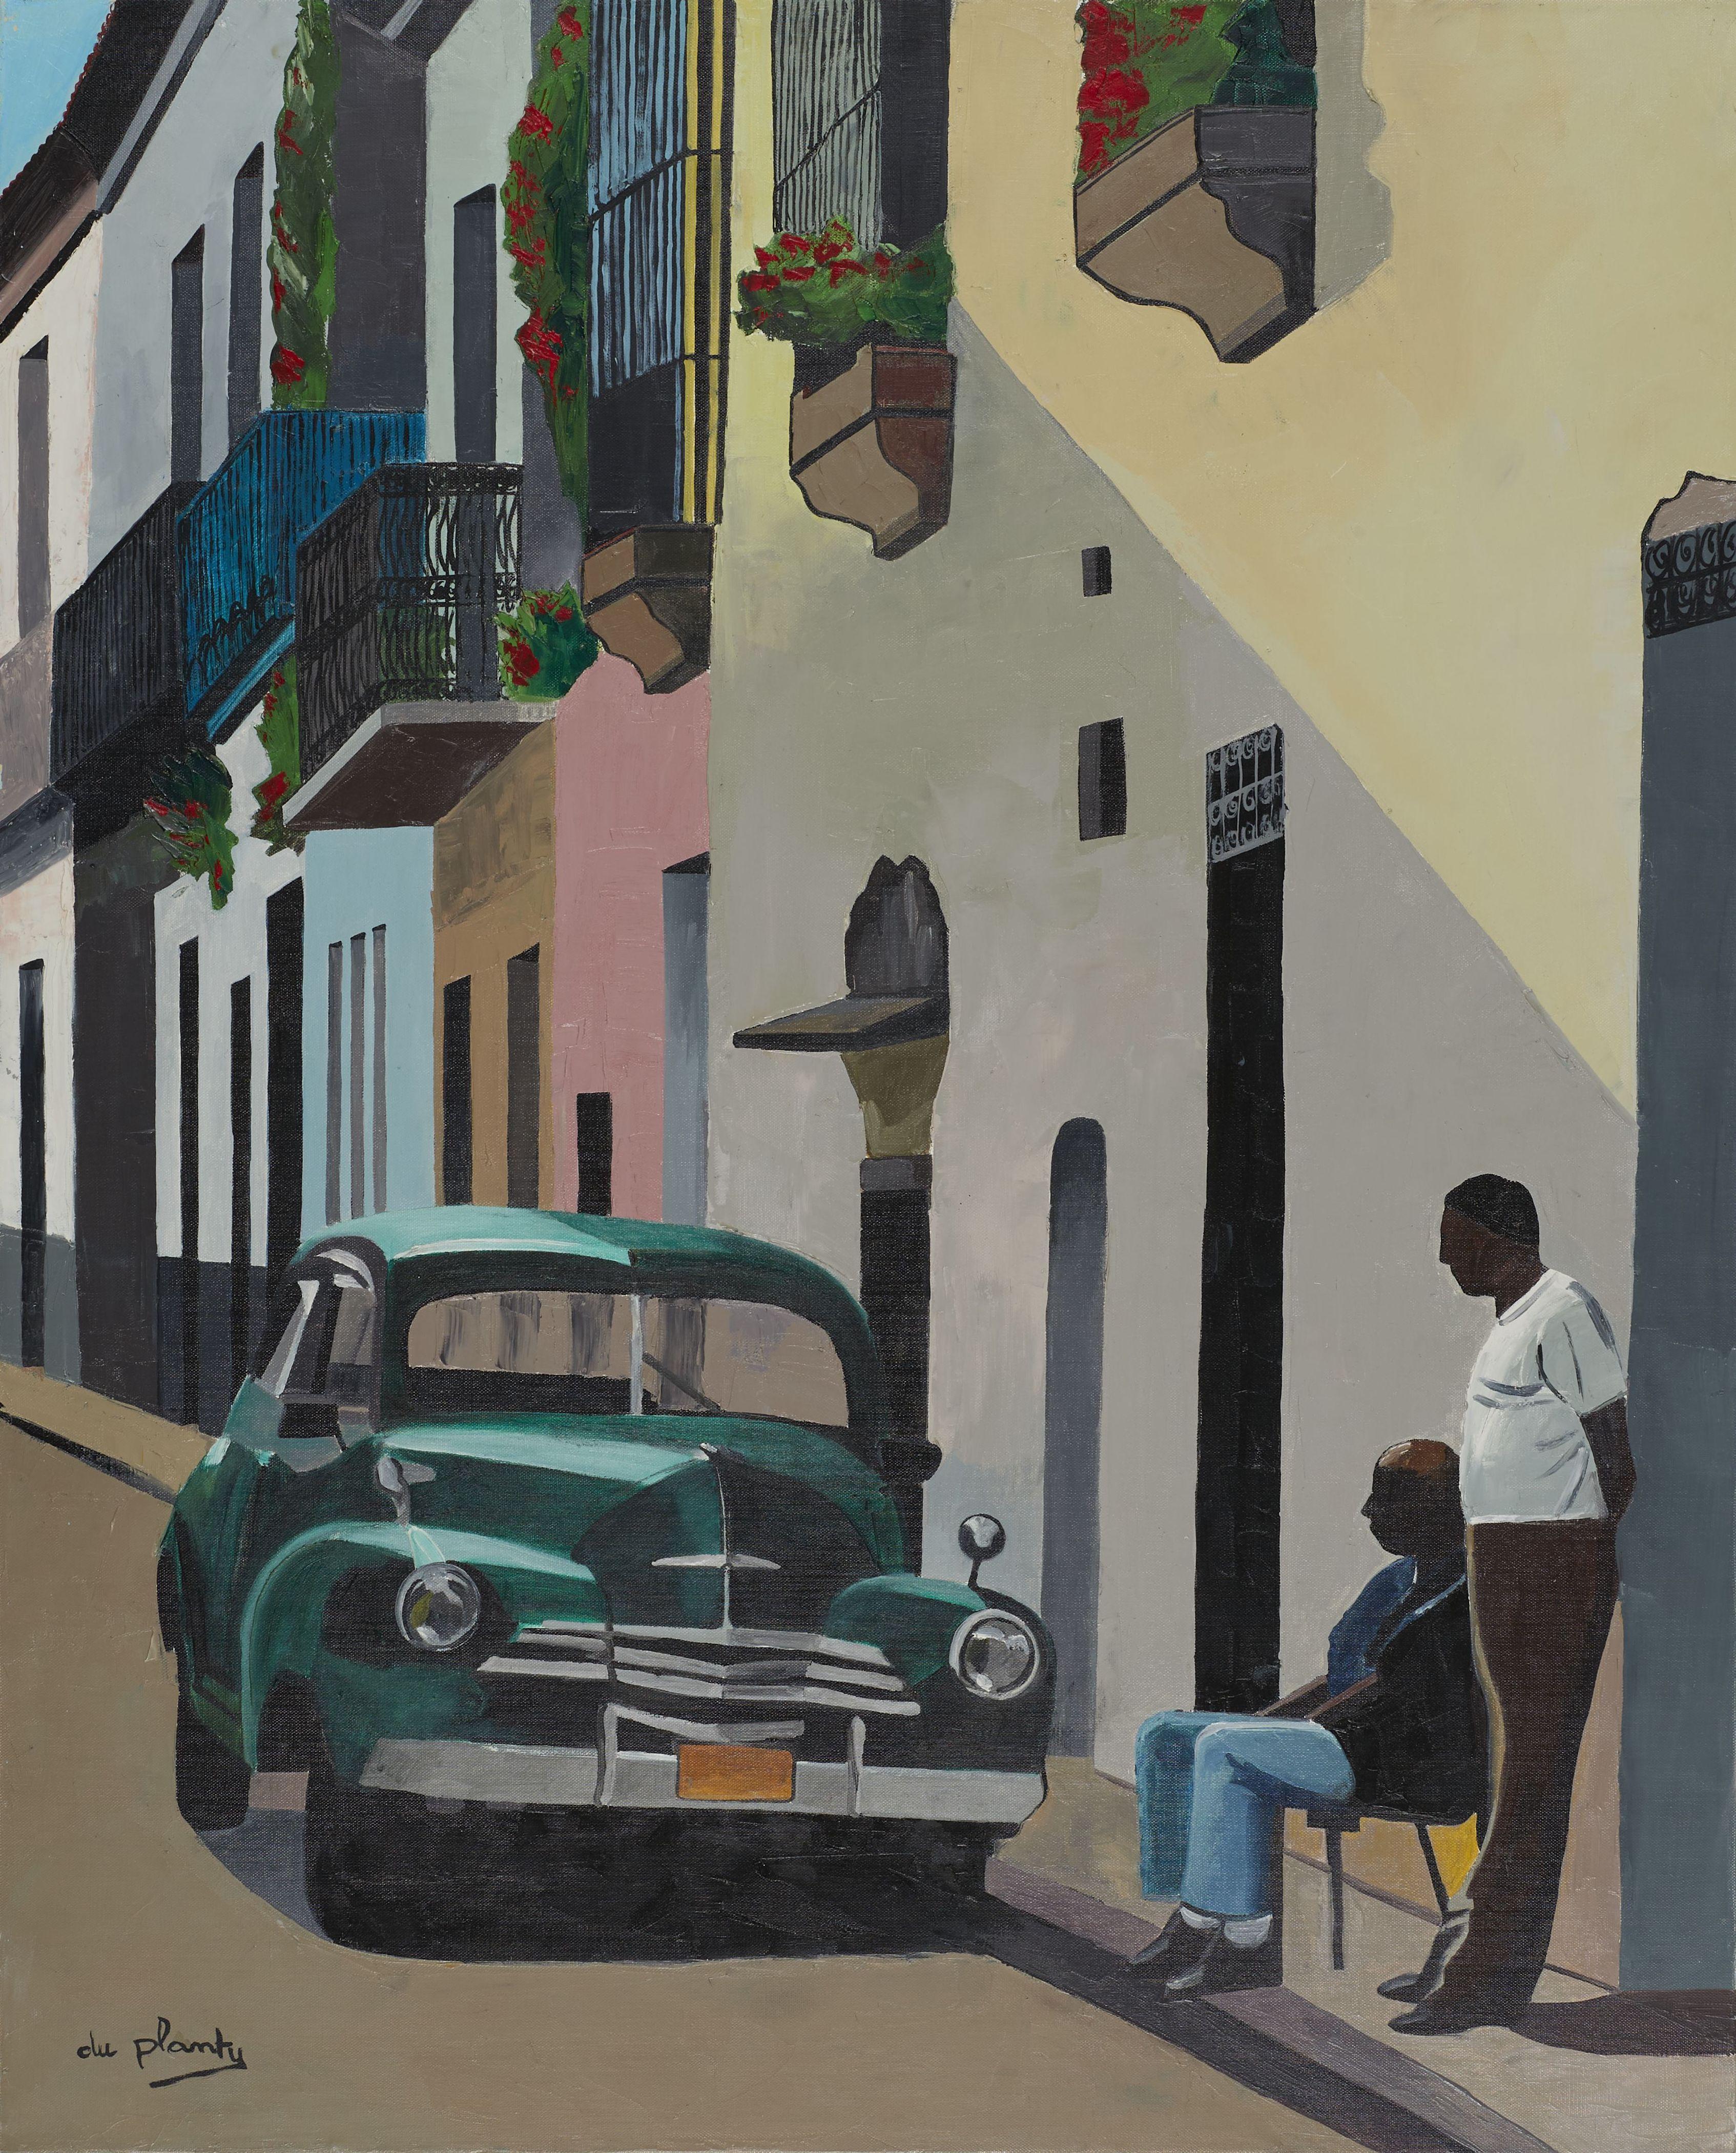 Oil on canvas

Anne du Planty is a French artist born in 1953 who lives & works in Paris, France.

Originally from North of France, she discovered lights of the South, the brightness of the sun, the shade of the alleyways while travelling in Cuba,